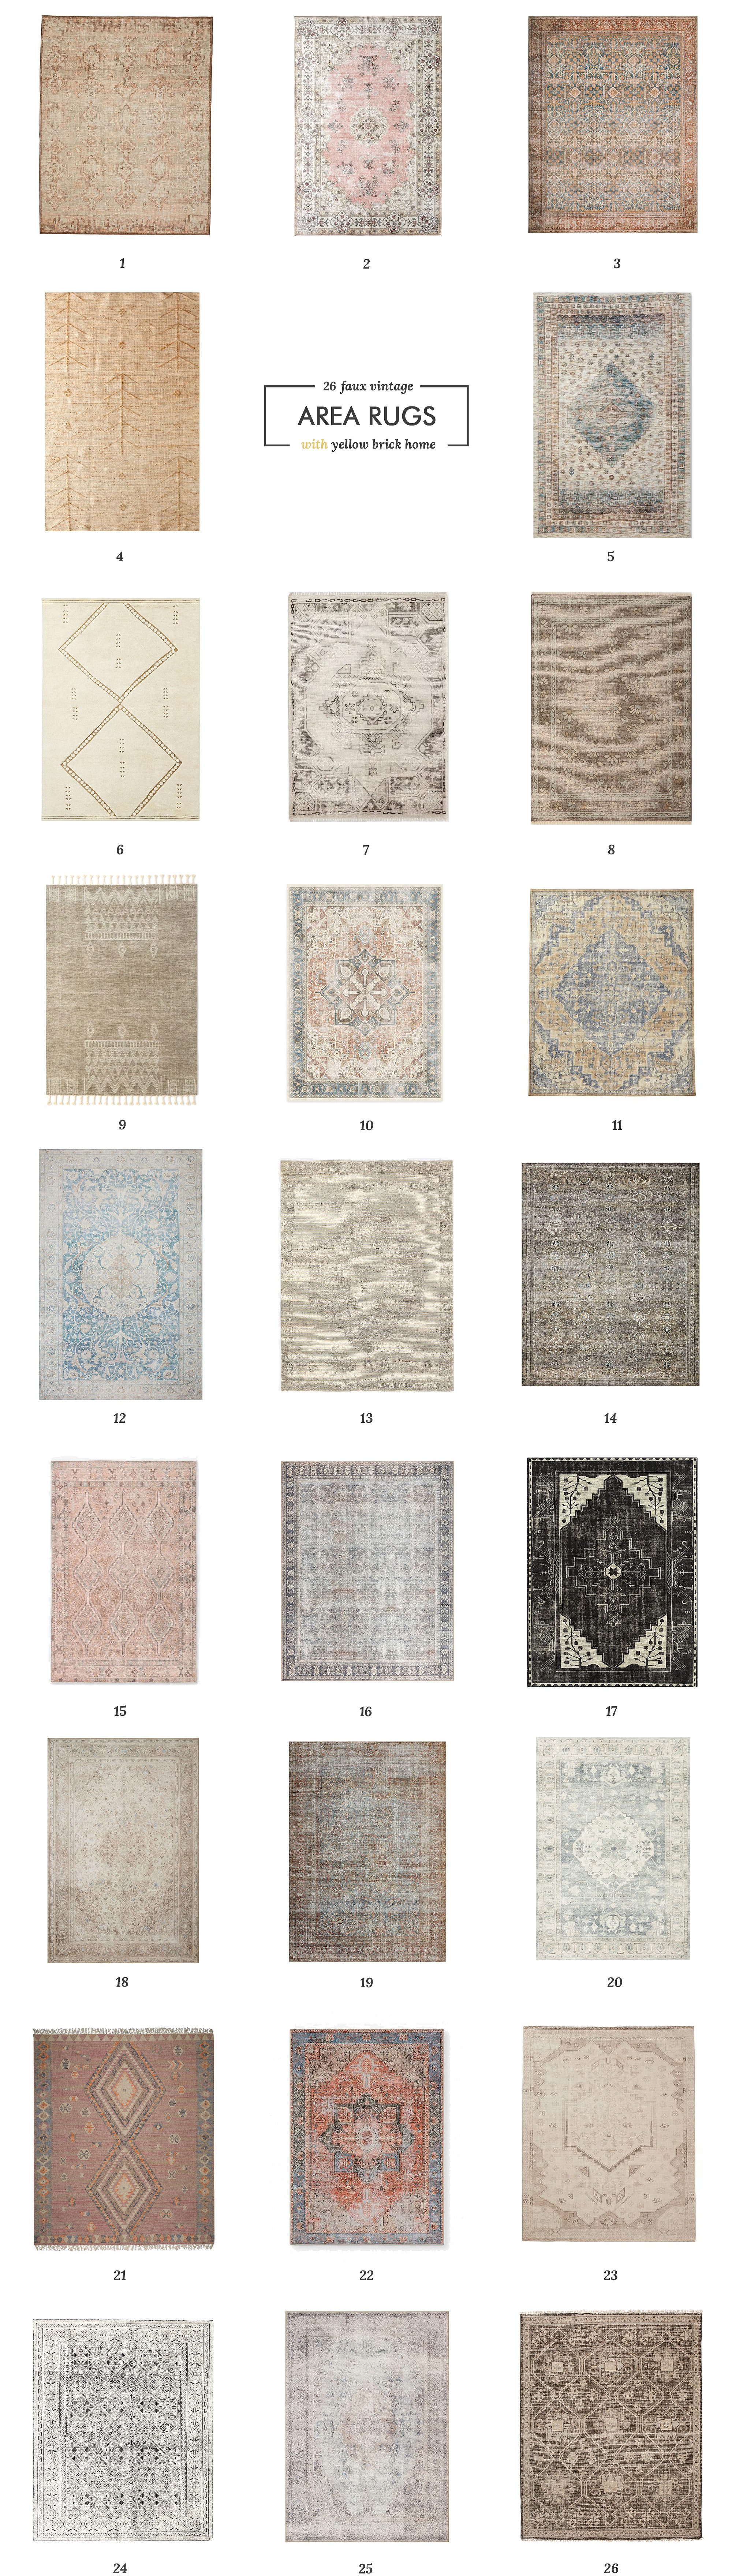 Faux Vintage Rug Round-Up! 26 of the best vintage/distressed rugs you can purchase today | via Yellow Brick Home